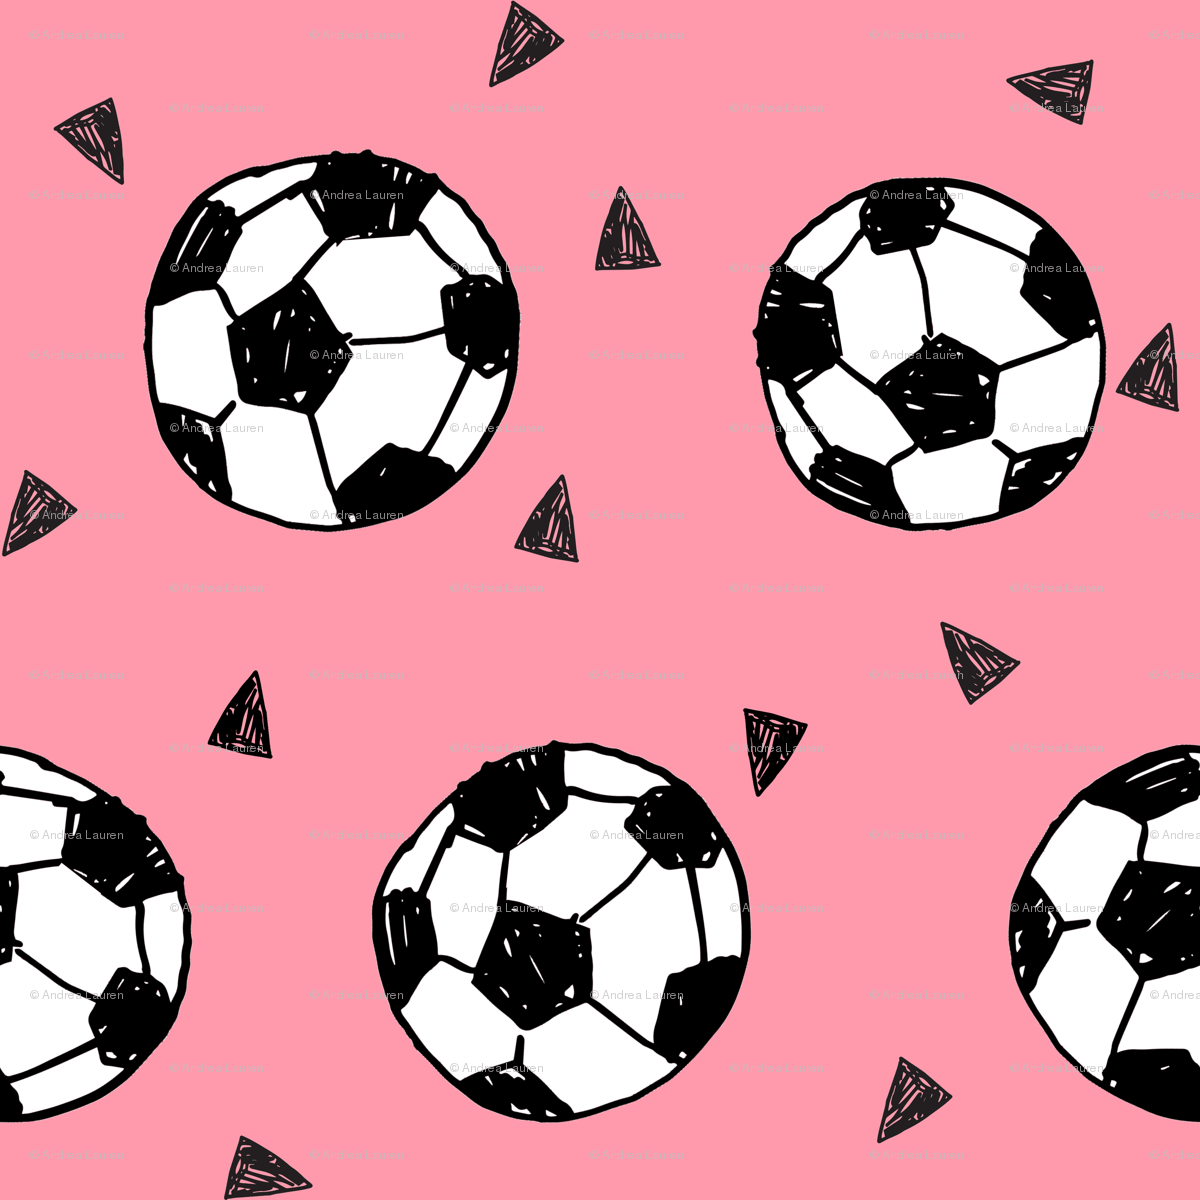 Girls Soccer Wallpapers Top Free Girls Soccer Backgrounds Wallpaperaccess Pngtree offers hd girls soccer background images for free download. girls soccer wallpapers top free